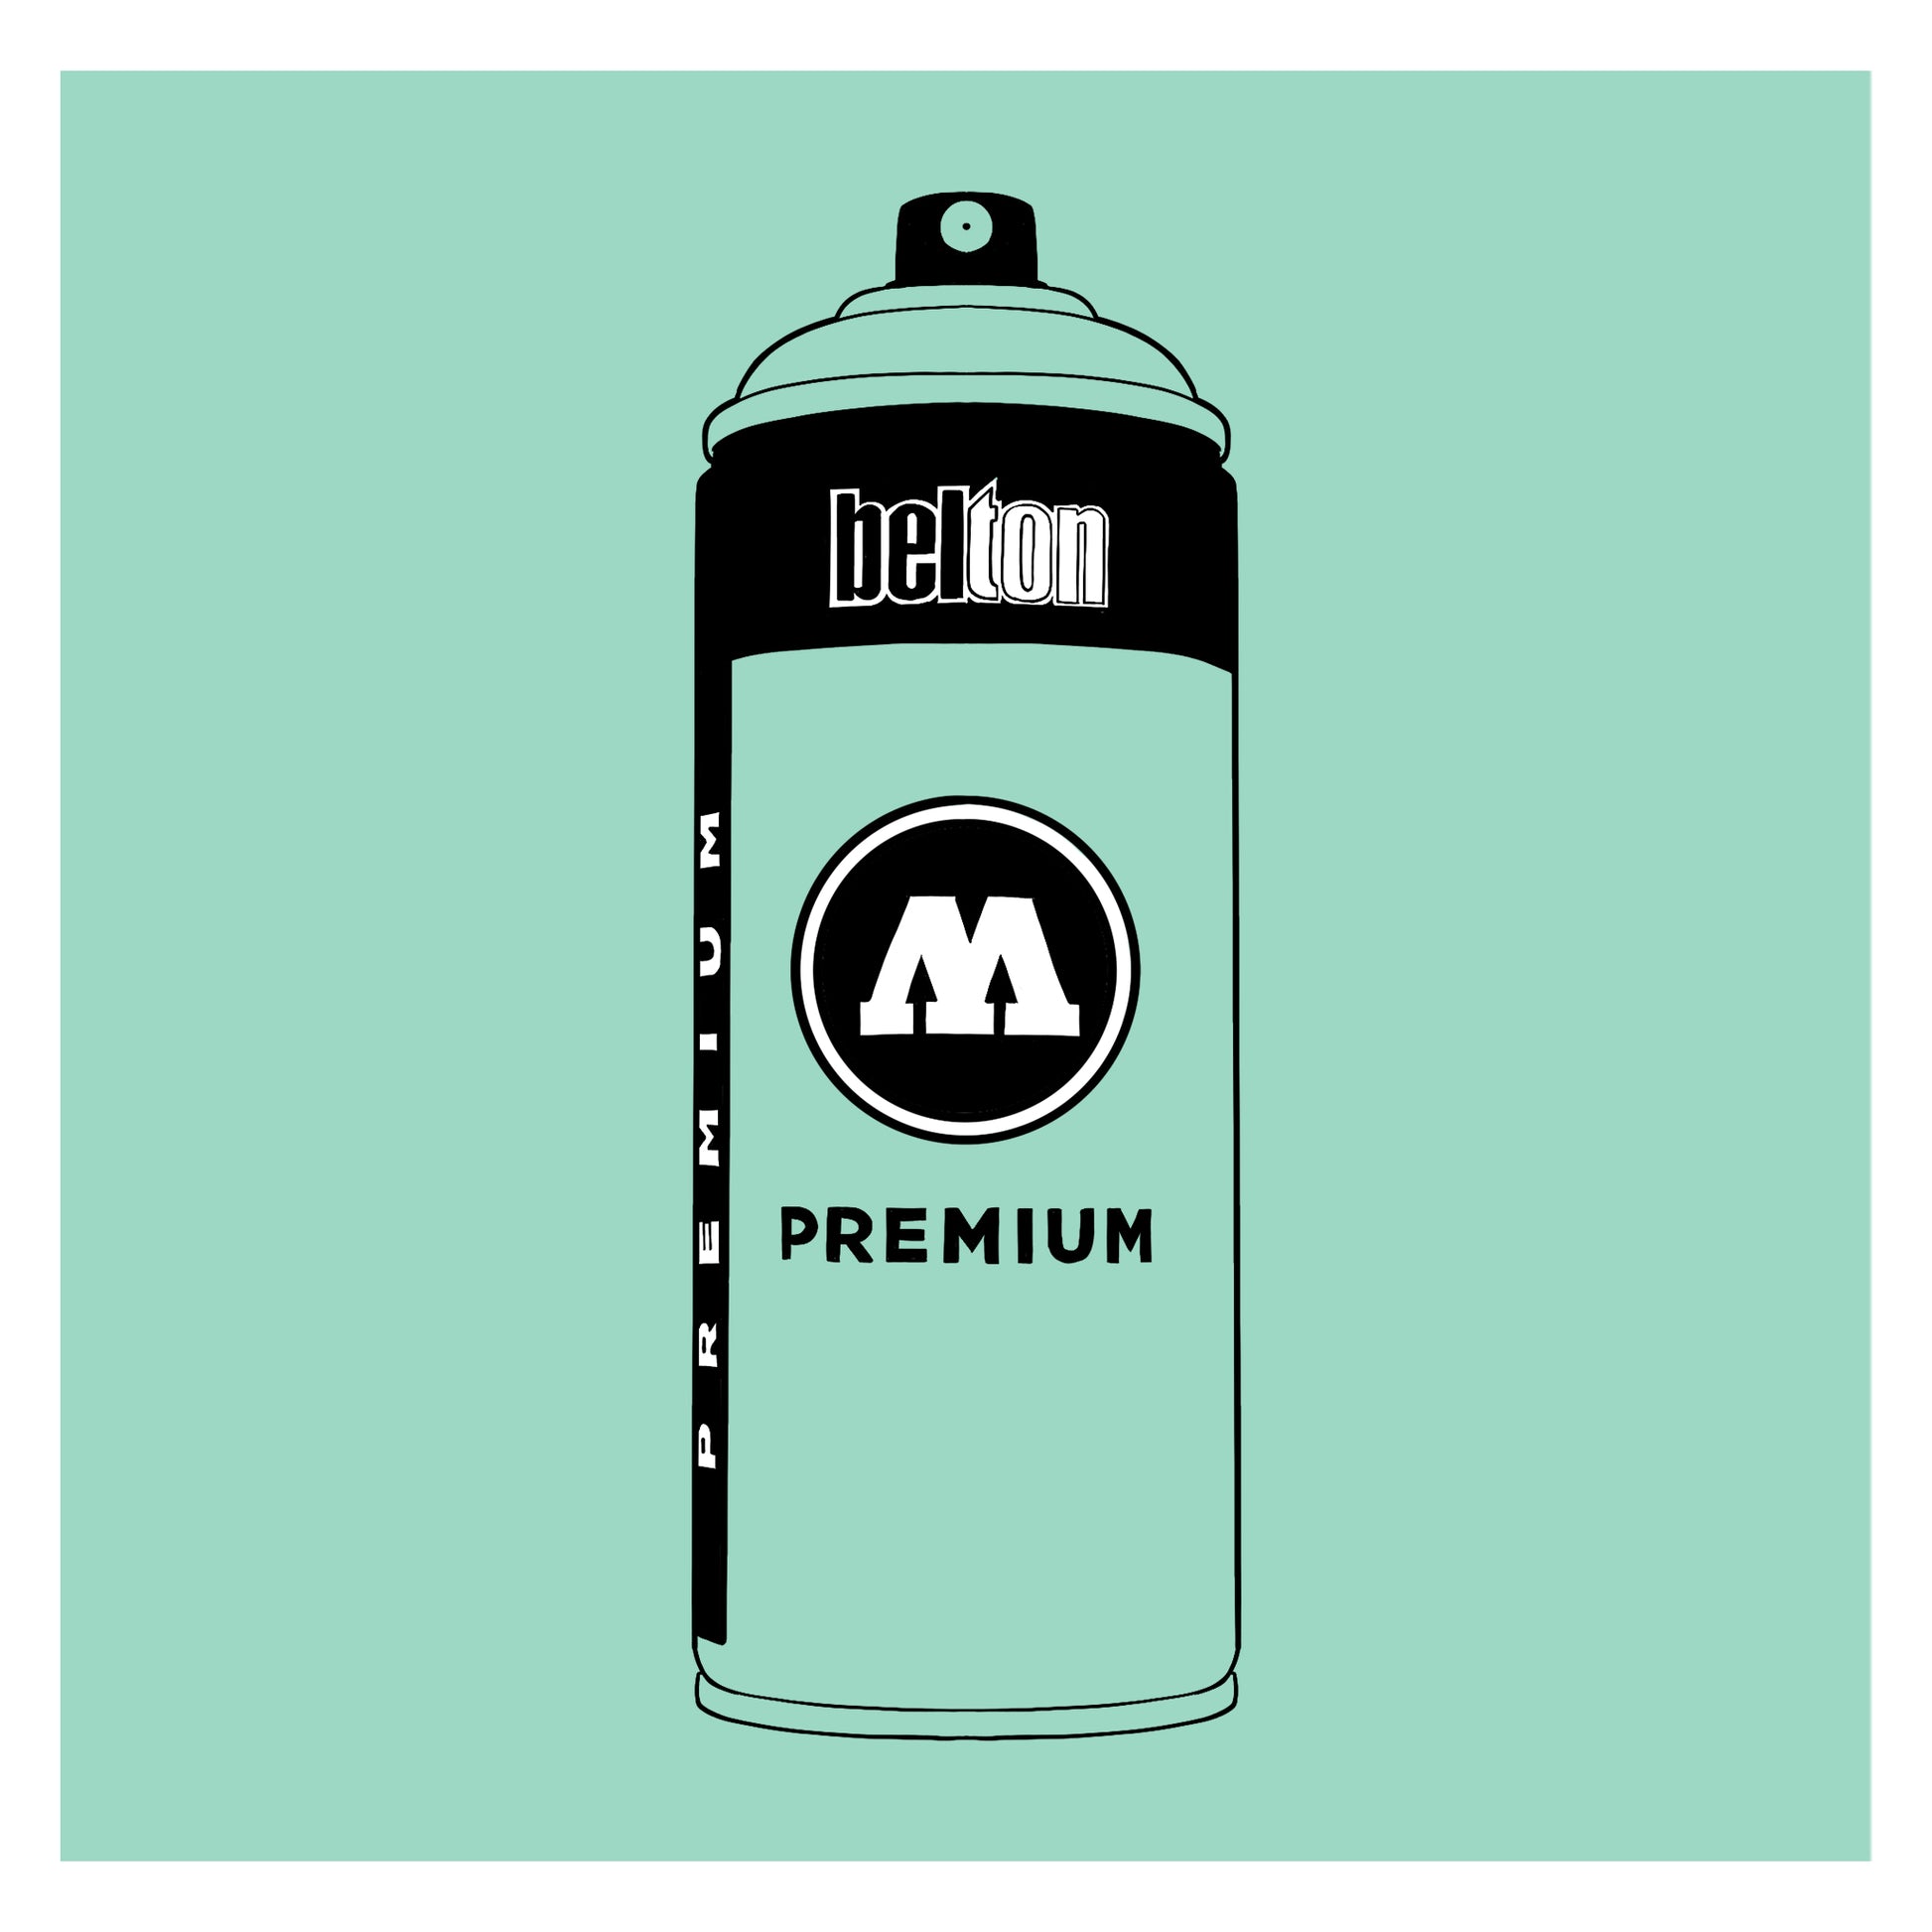 A black outline drawing of a pastel aquamarine spray paint can with the words "belton","premium" and the letter"M" written on the face in black and white font. The background is a color swatch of the same aquamarine with a white border